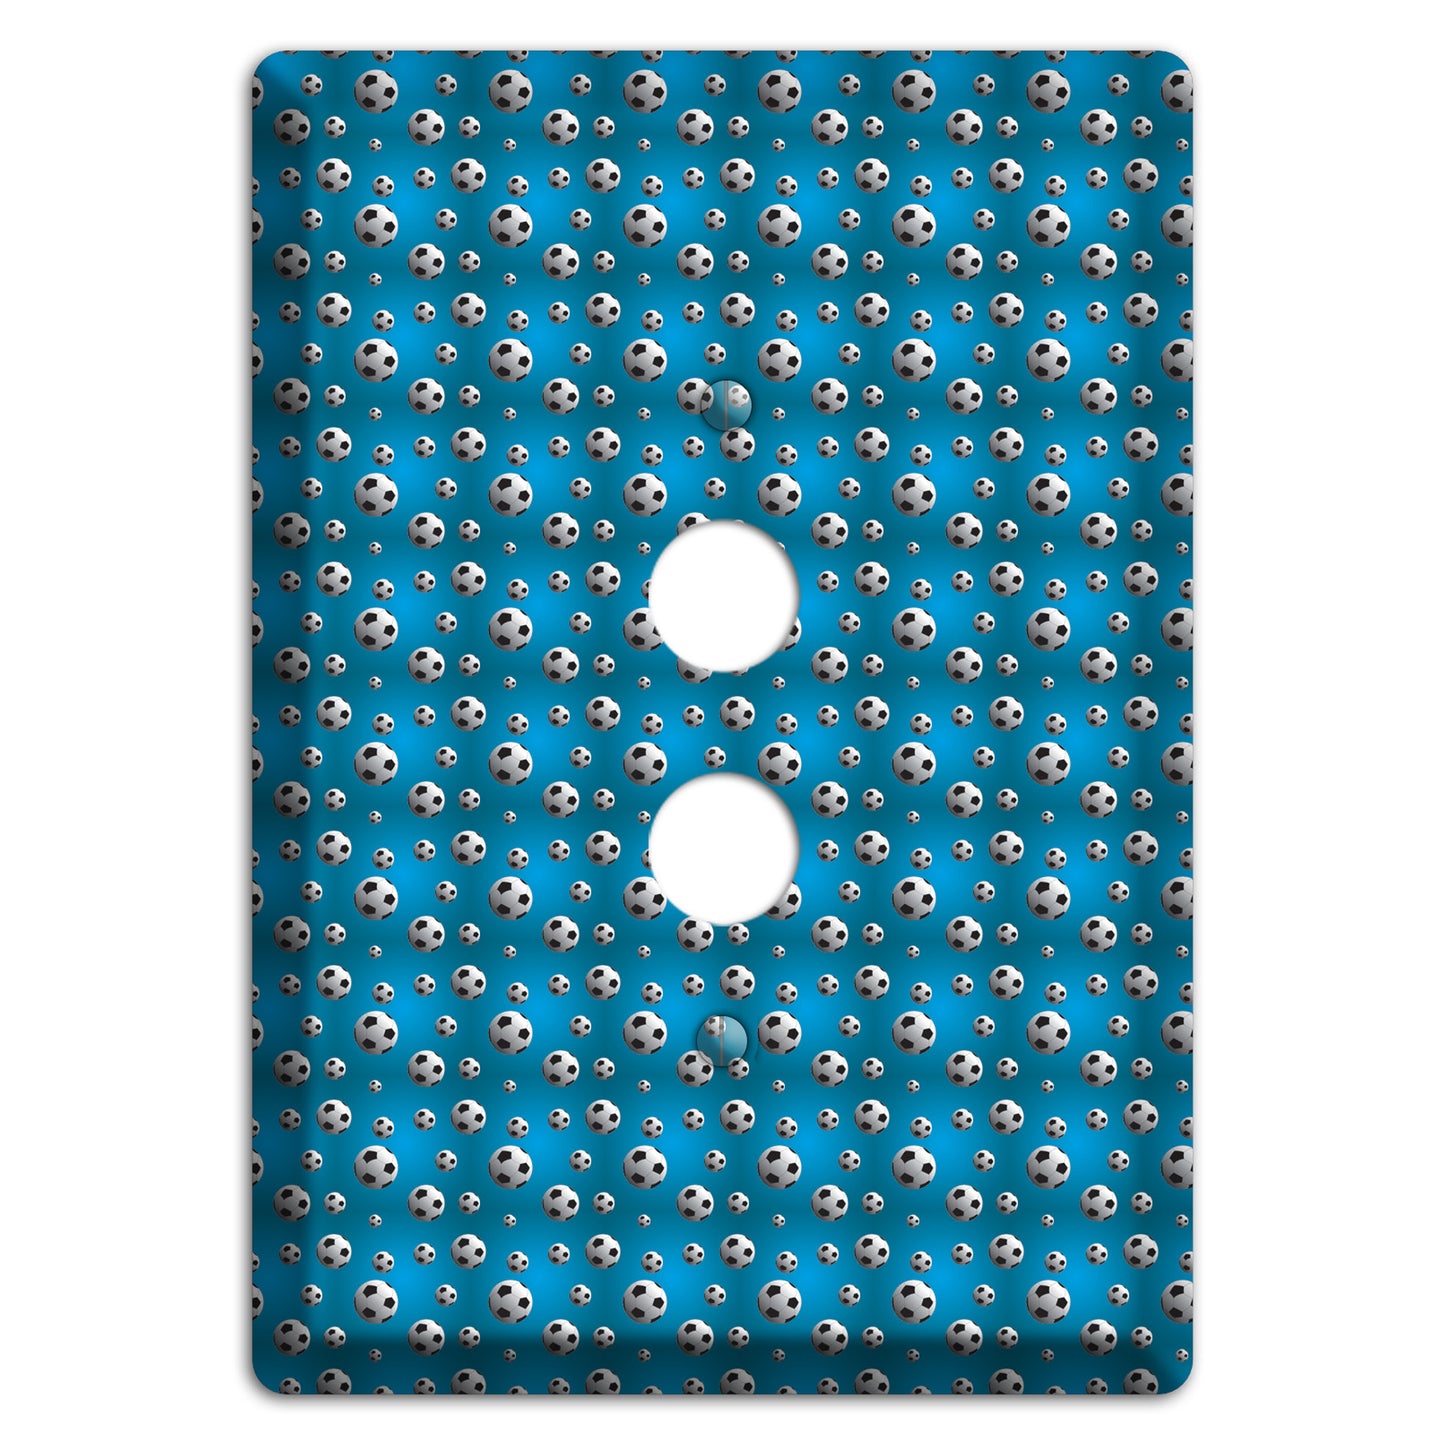 Blue with Soccer Balls 1 Pushbutton Wallplate